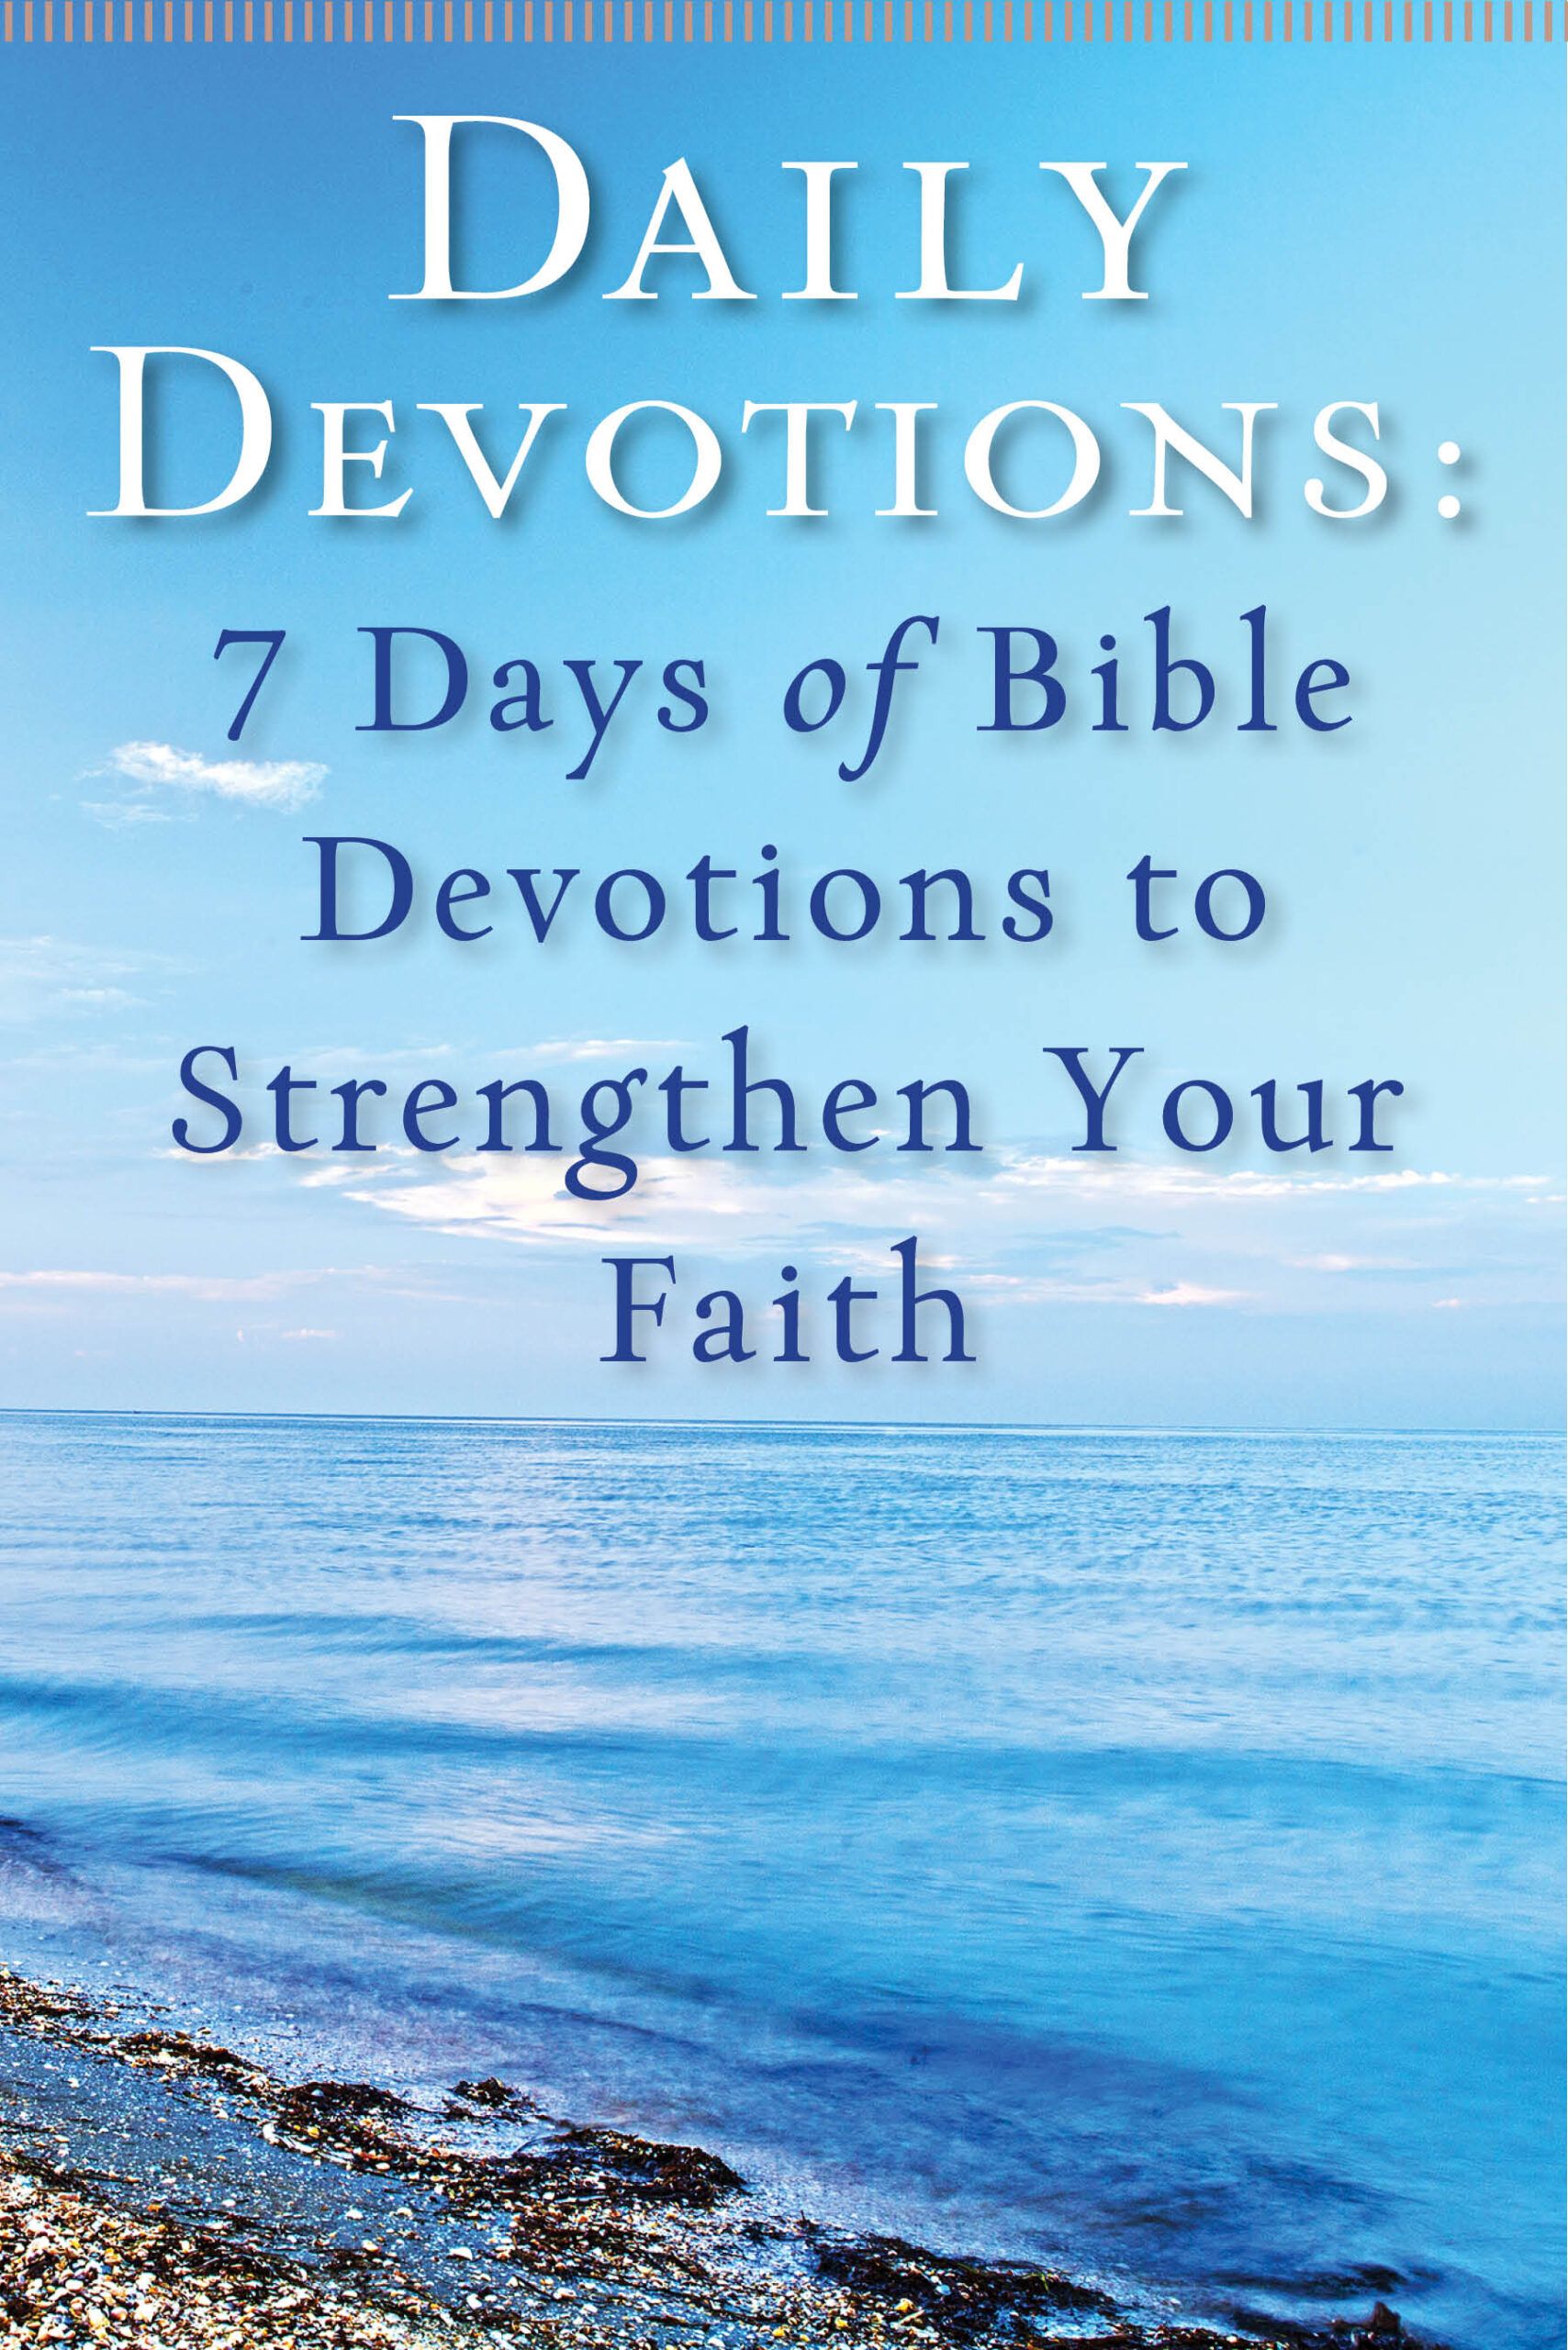 Daily Devotions: 7 Days of Bible Devotions to Strengthen Your Faith